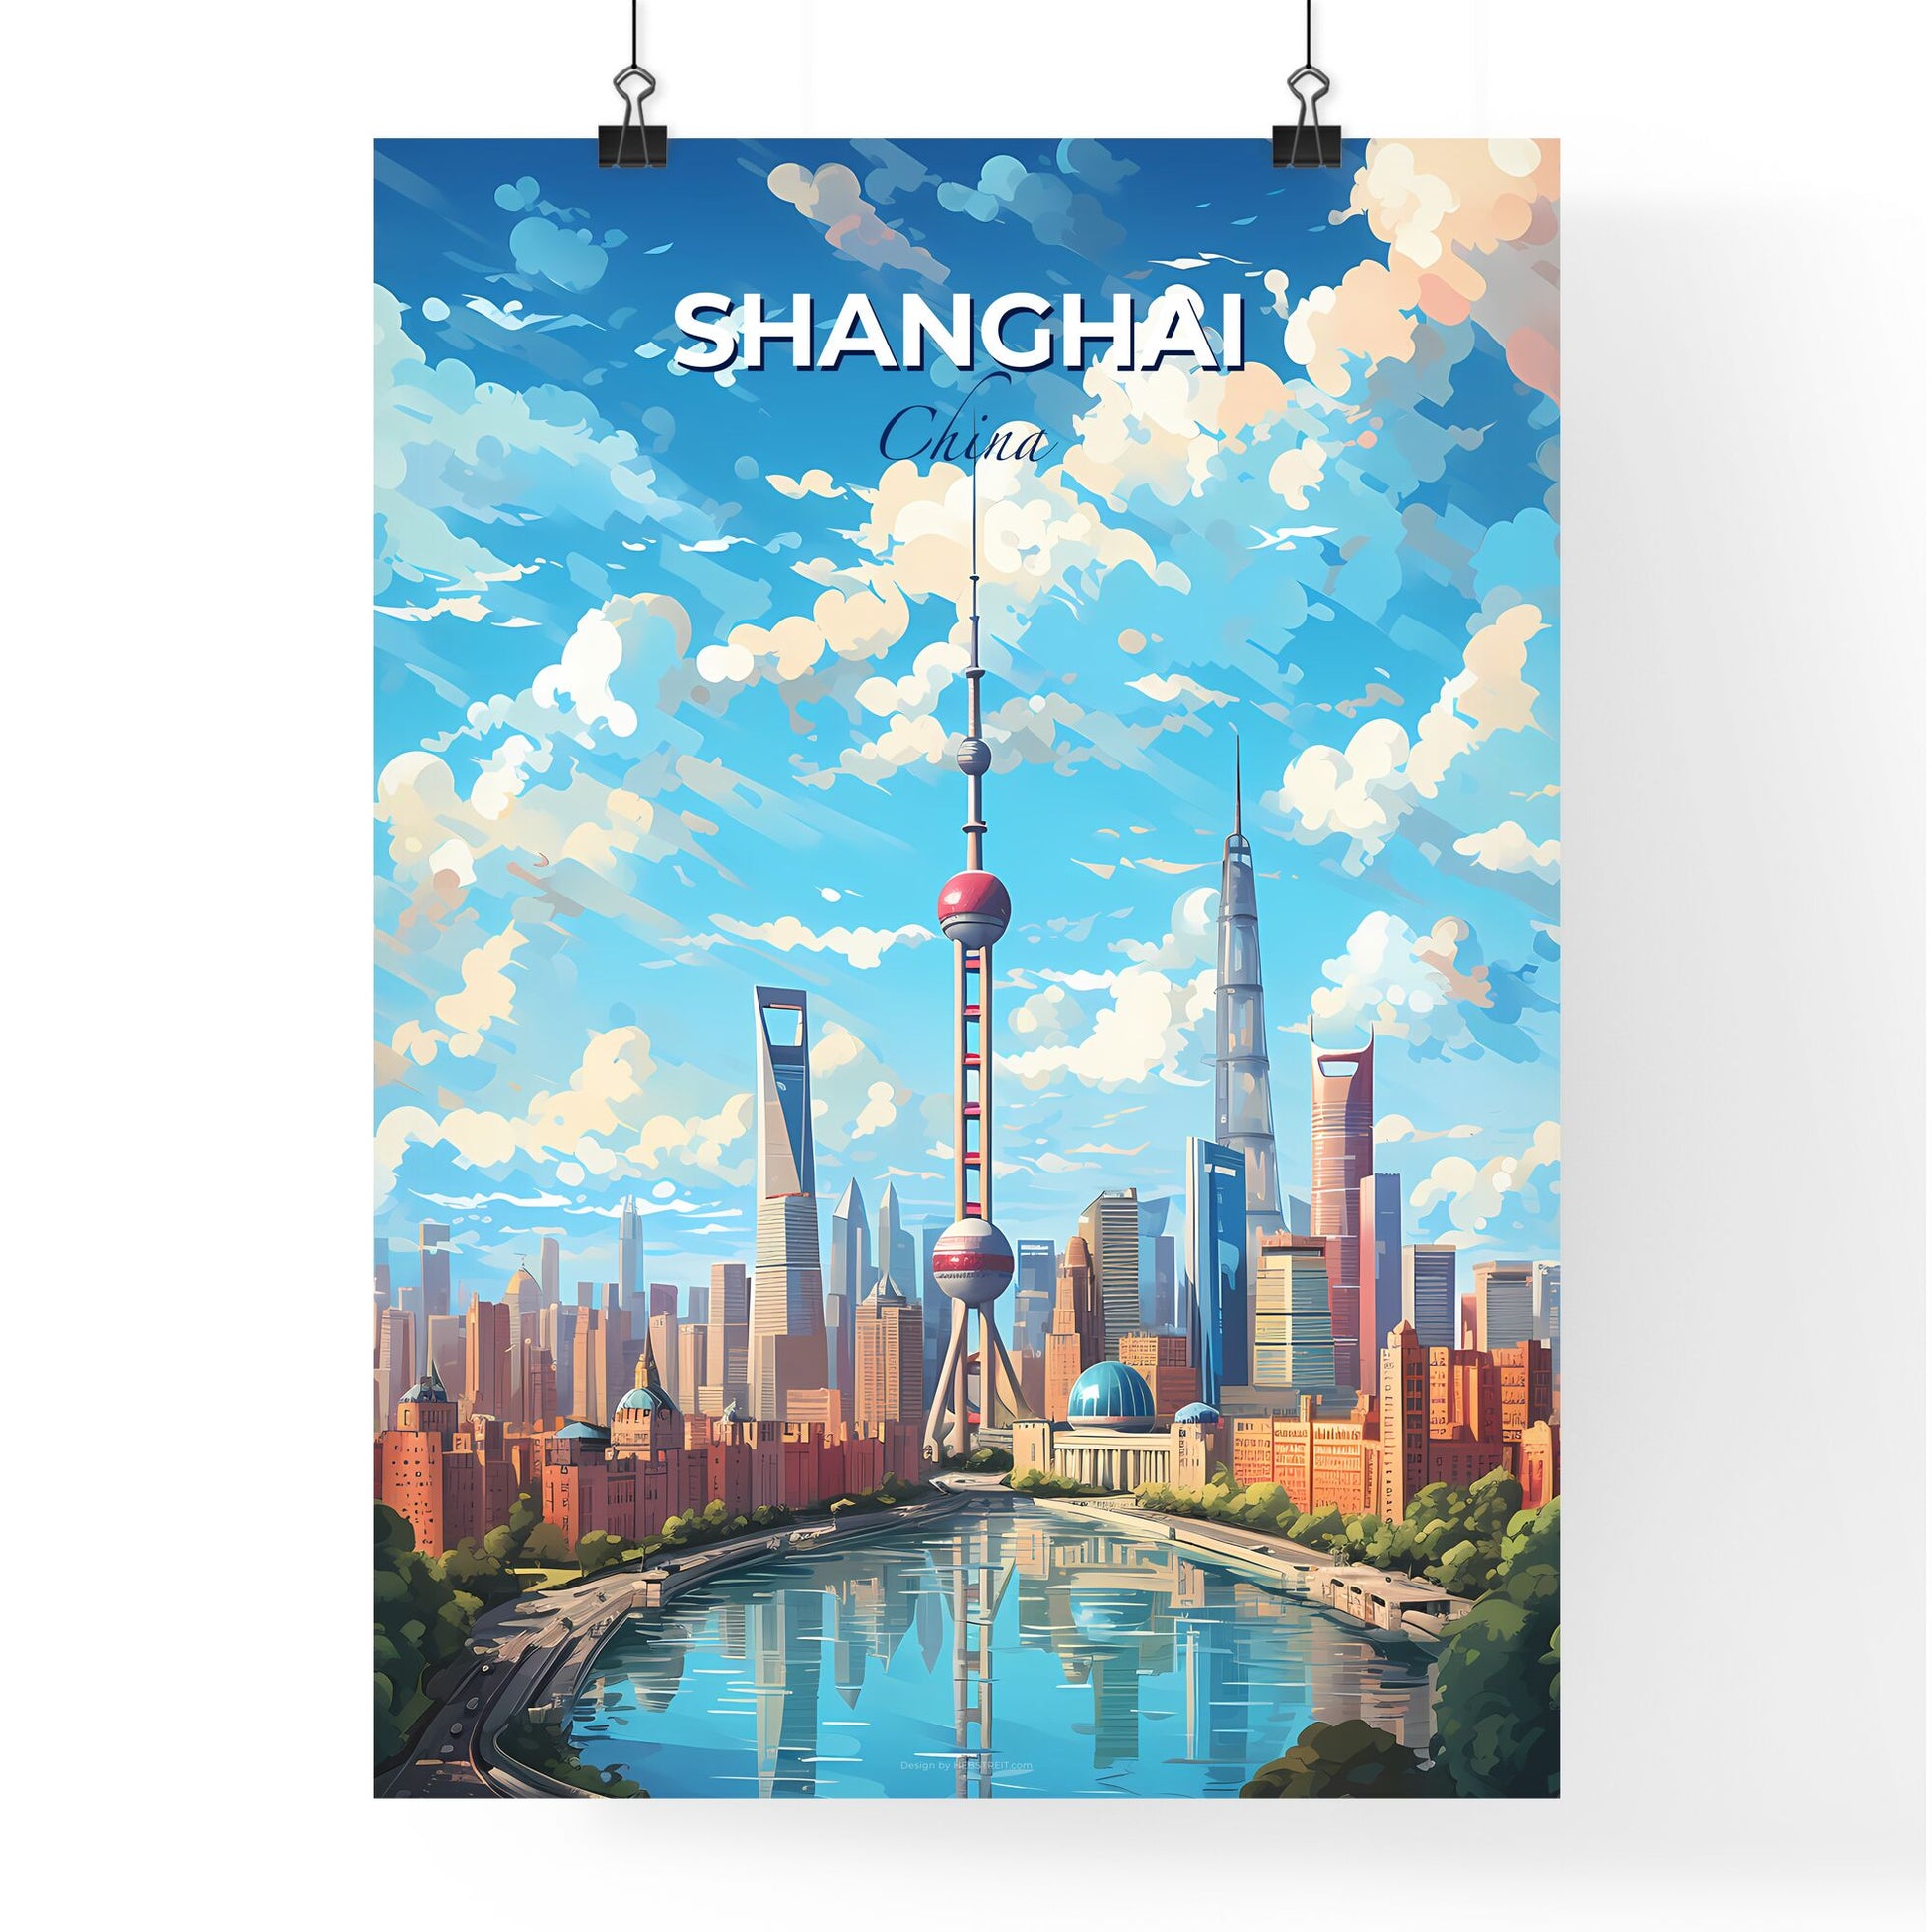 Shanghai China Skyline - A City With A Tall Tower And A River - Customizable Travel Gift Default Title